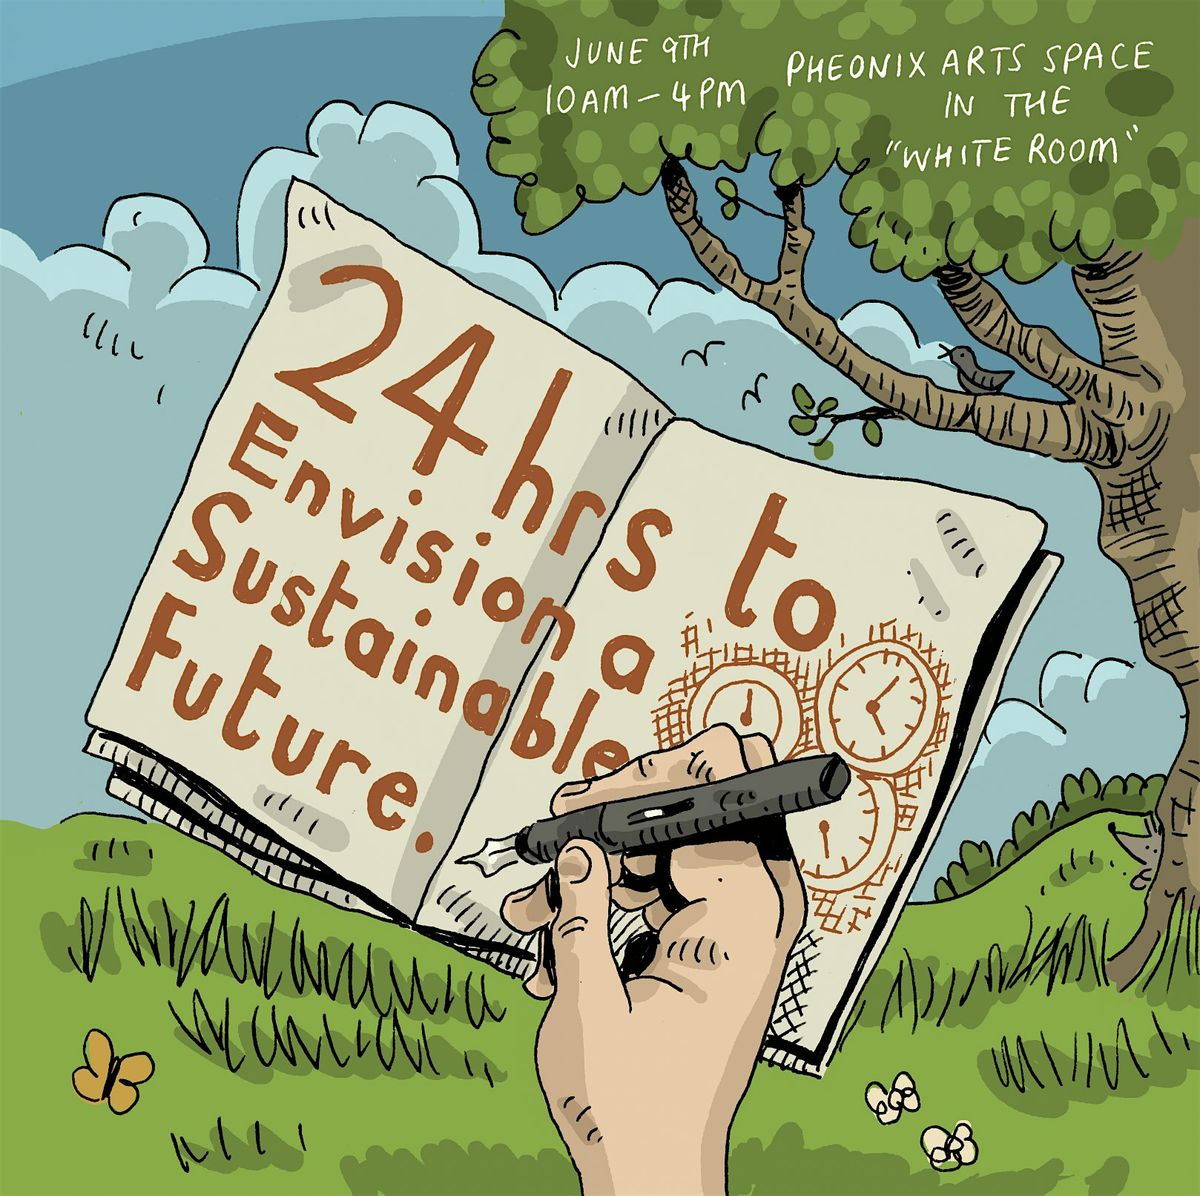 24 Hours to Envision a Sustainable Future